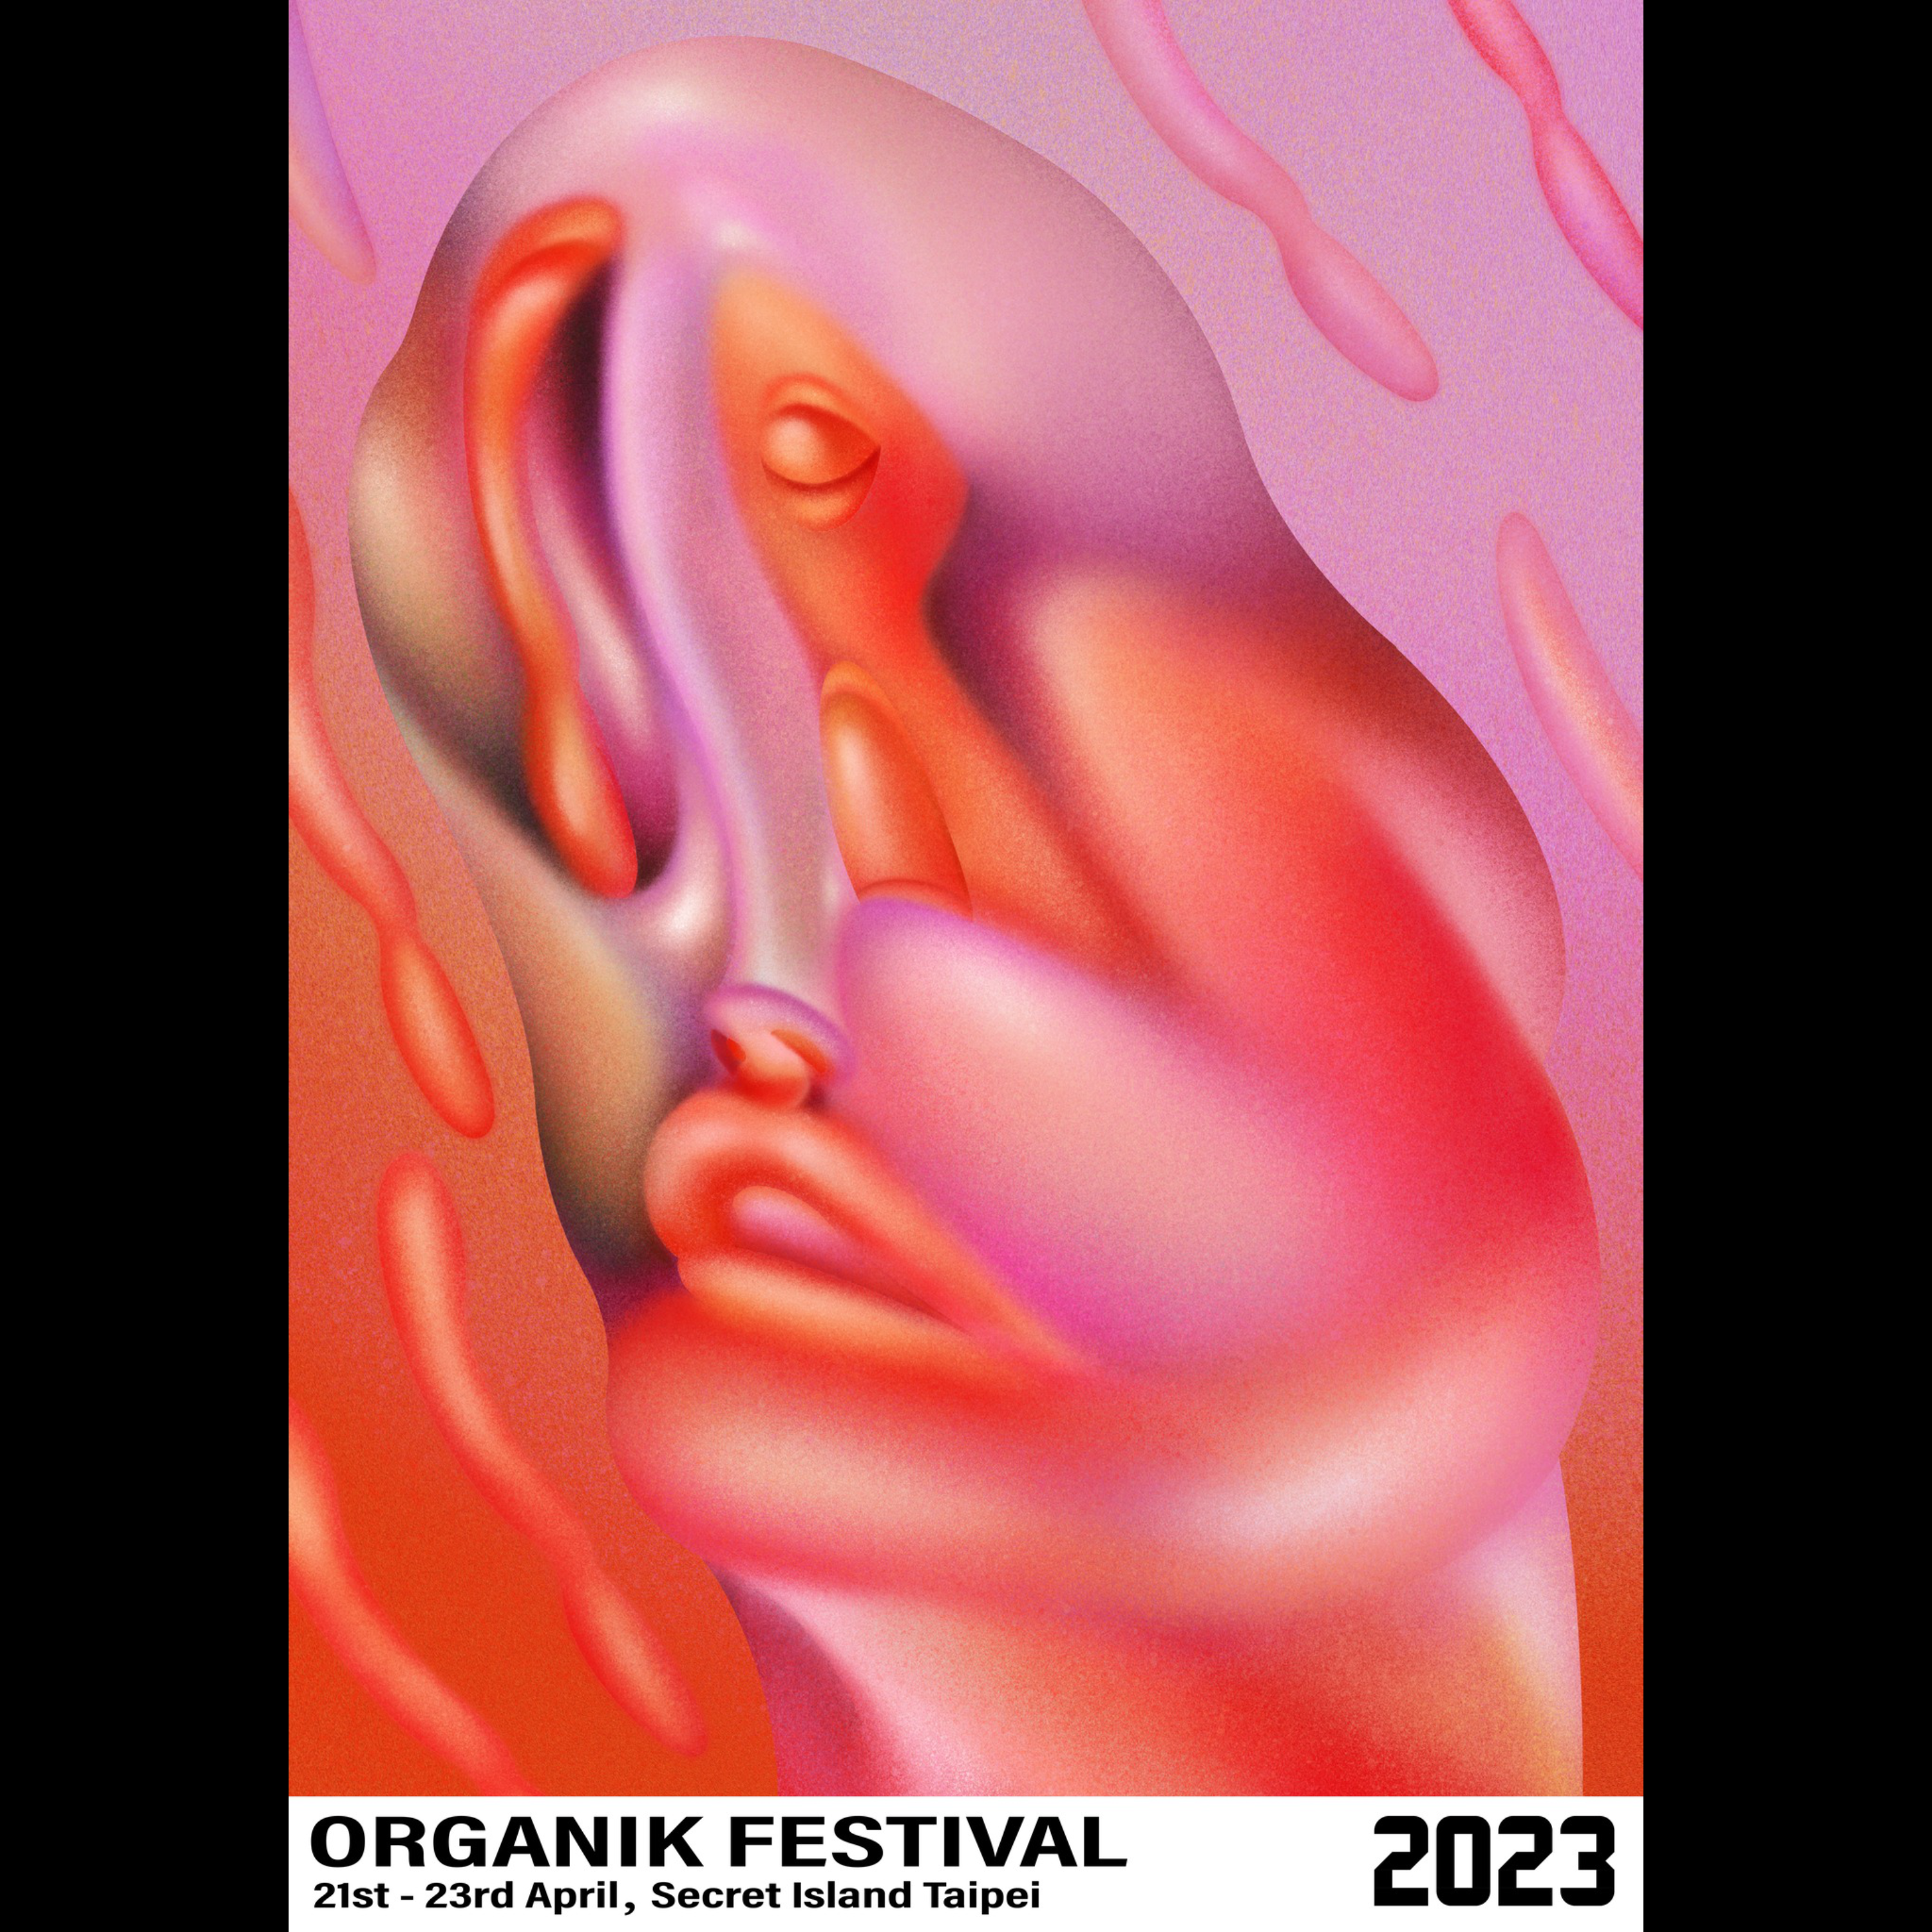 Flyer for Organik Festival in Taipei, Taiwan with Bézier April 21st 2023